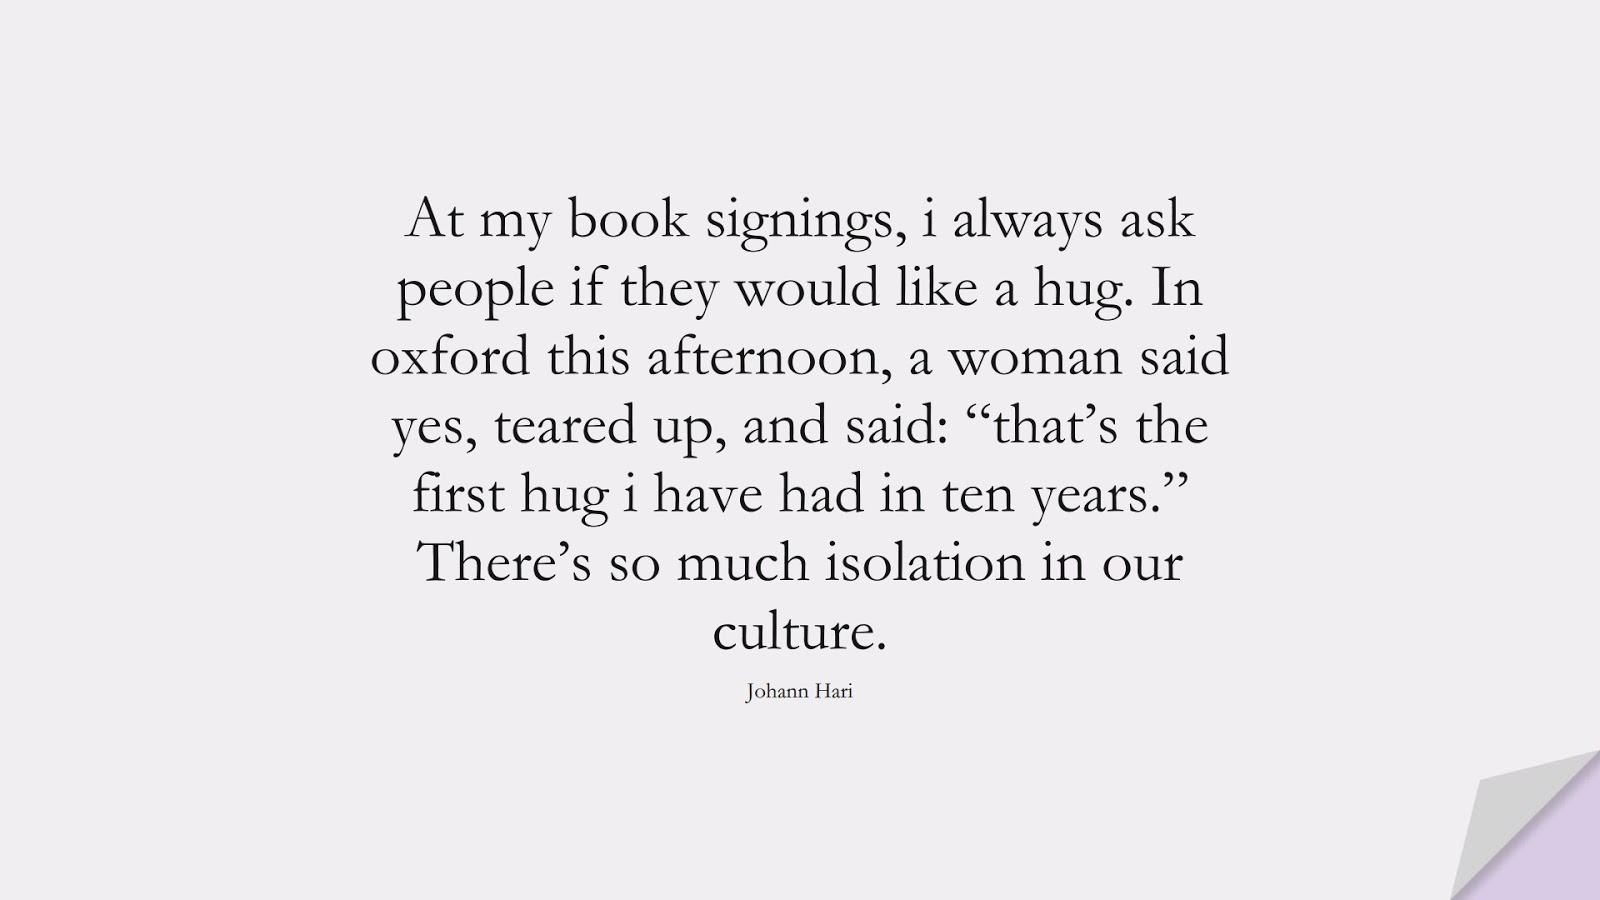 At my book signings, i always ask people if they would like a hug. In oxford this afternoon, a woman said yes, teared up, and said: “that’s the first hug i have had in ten years.” There’s so much isolation in our culture. (Johann Hari);  #DepressionQuotes